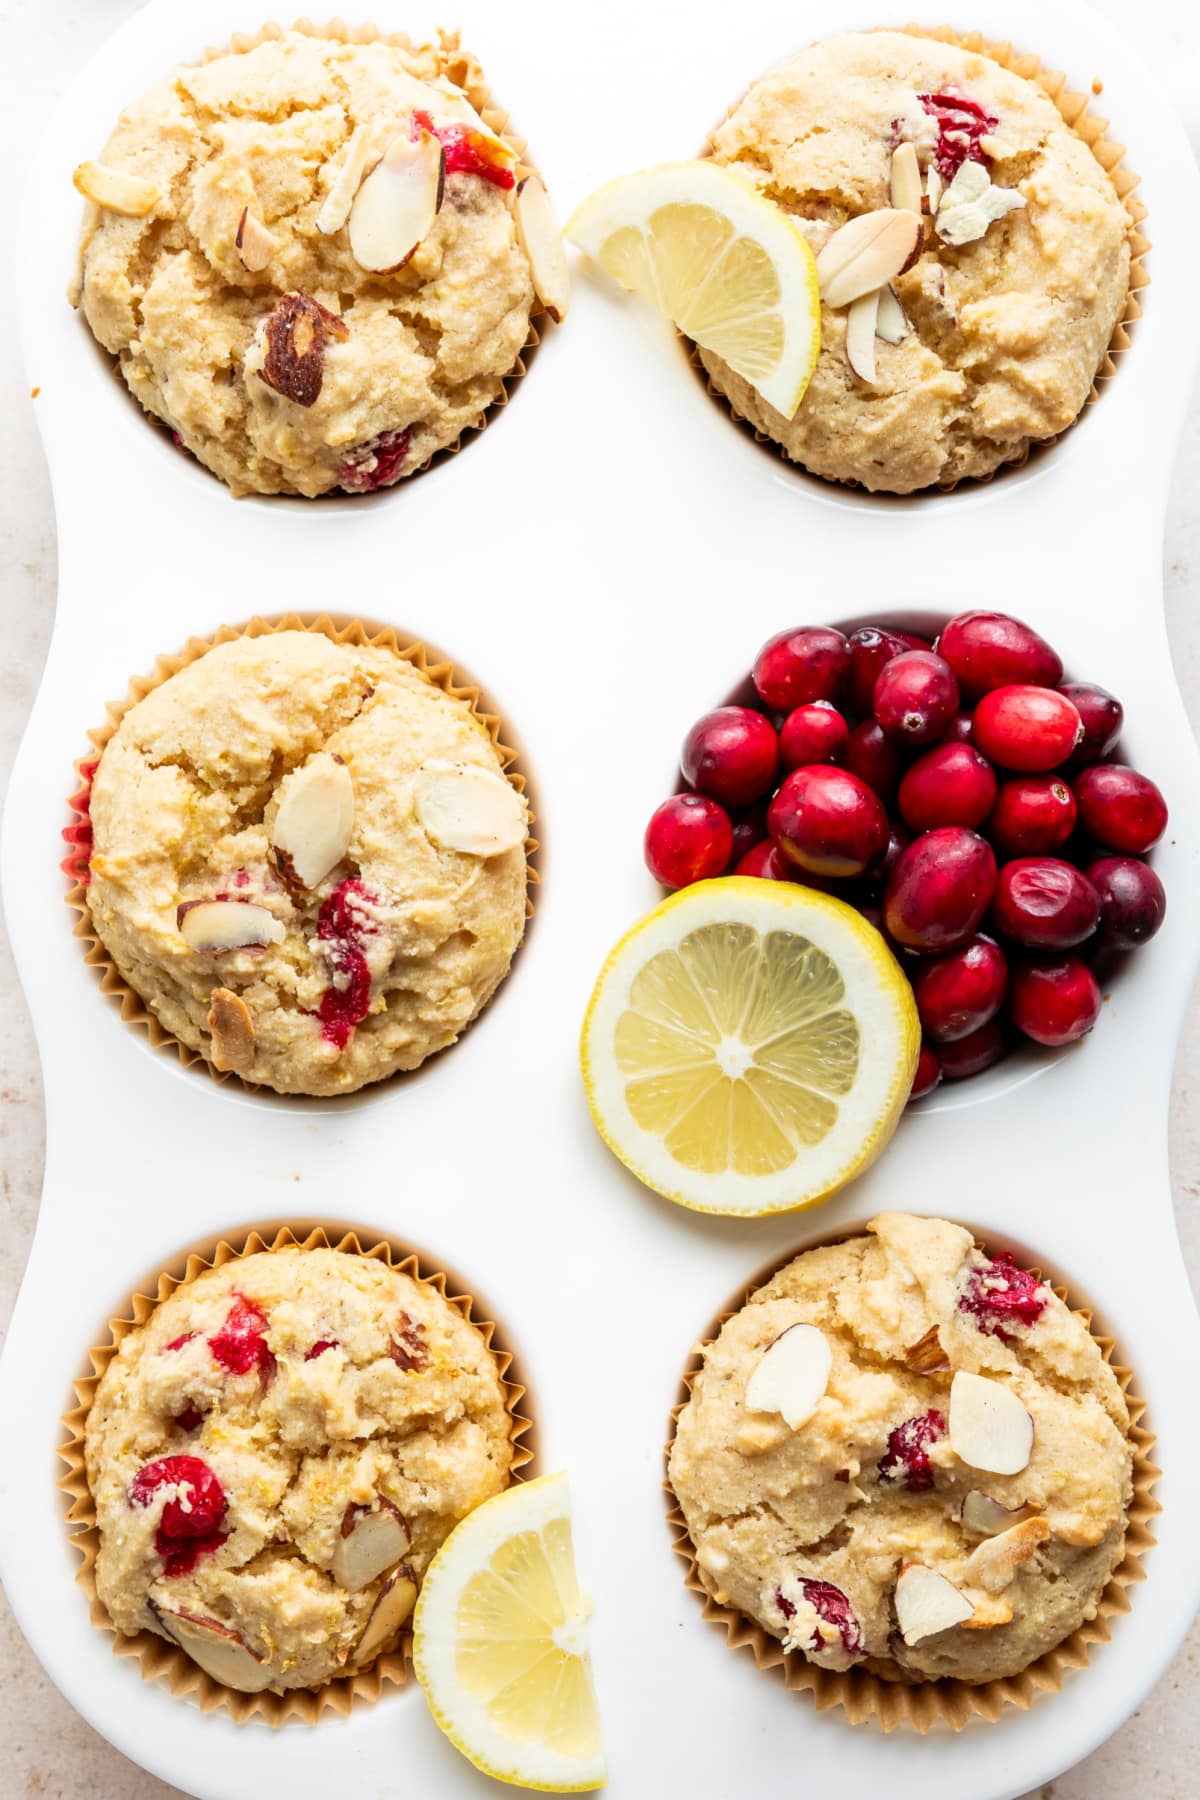 Overhead view of a 6 cup white muffin tin full of fresh baked muffins. There are five cranberry lemon muffins and one muffin cup full of fresh cranberries. Slices of lemon sit on two of the muffins and on the side of the cranberries.